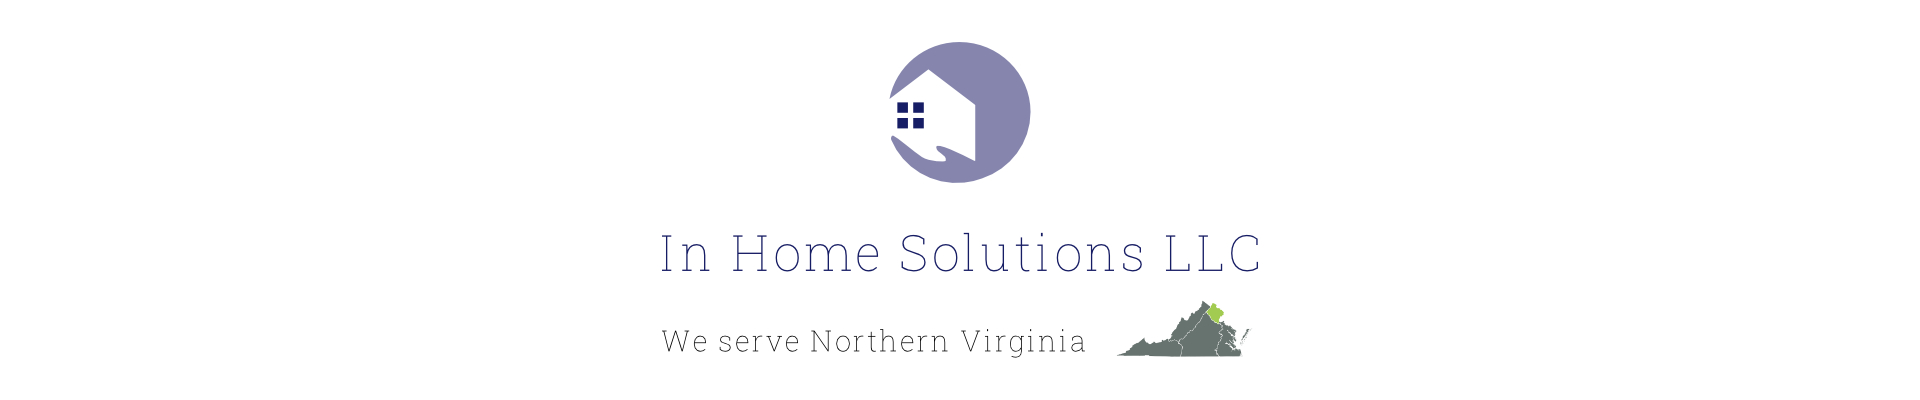 In Home Solutions LLC in Northern Virginia